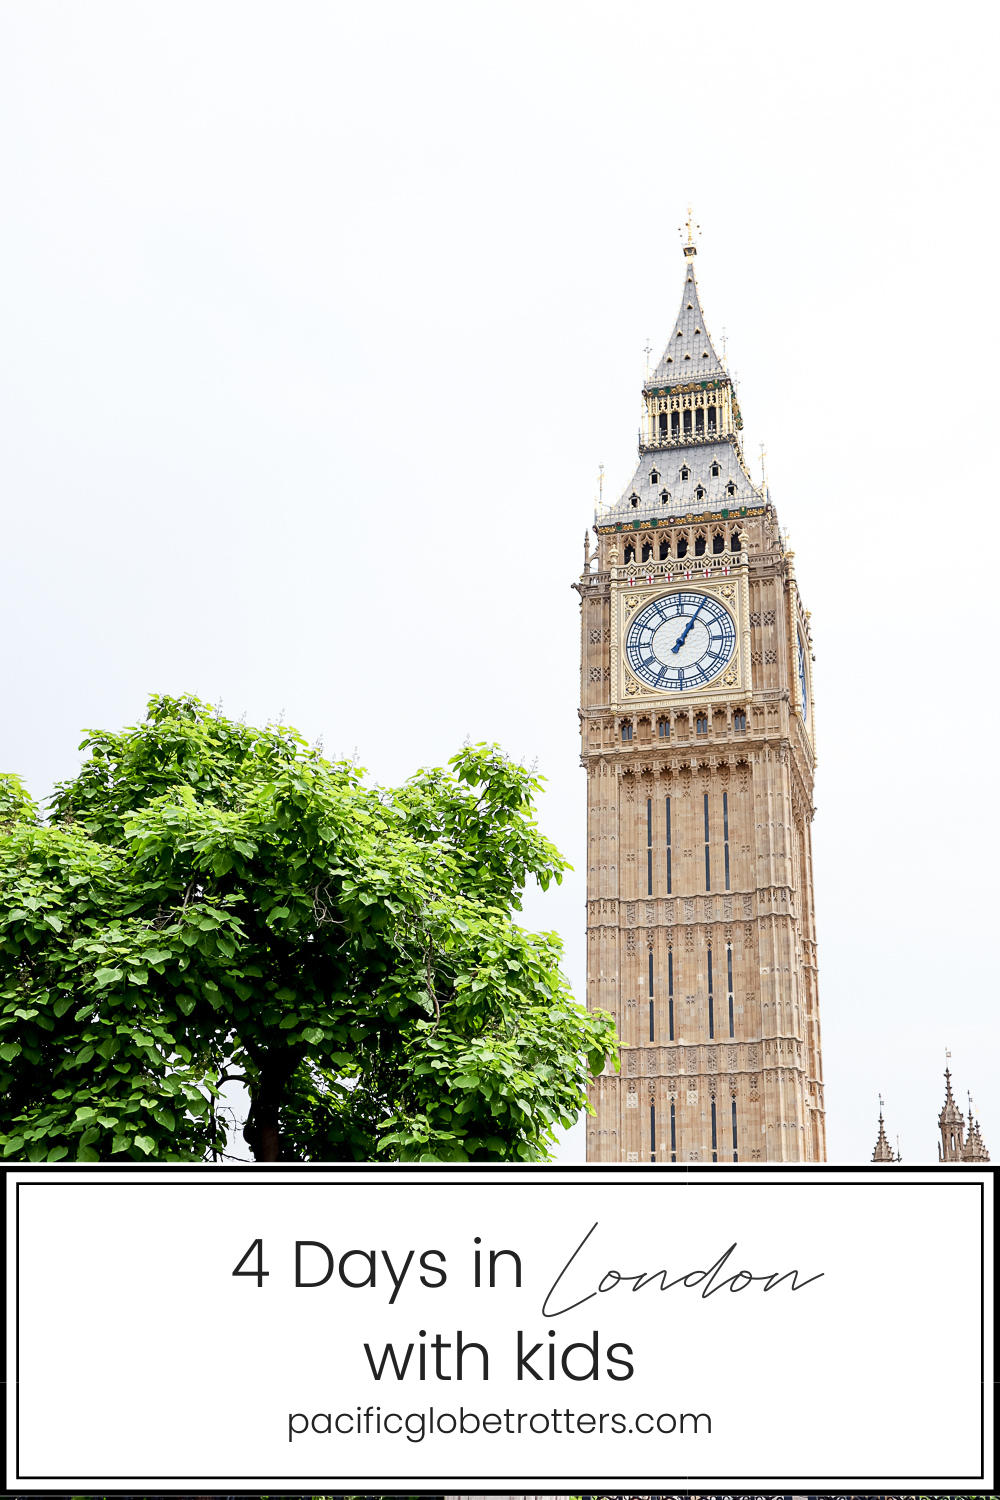 Pacific Globetrotters, budget family travel blog, shares 4 day itinerary in London with kids. Big Ben